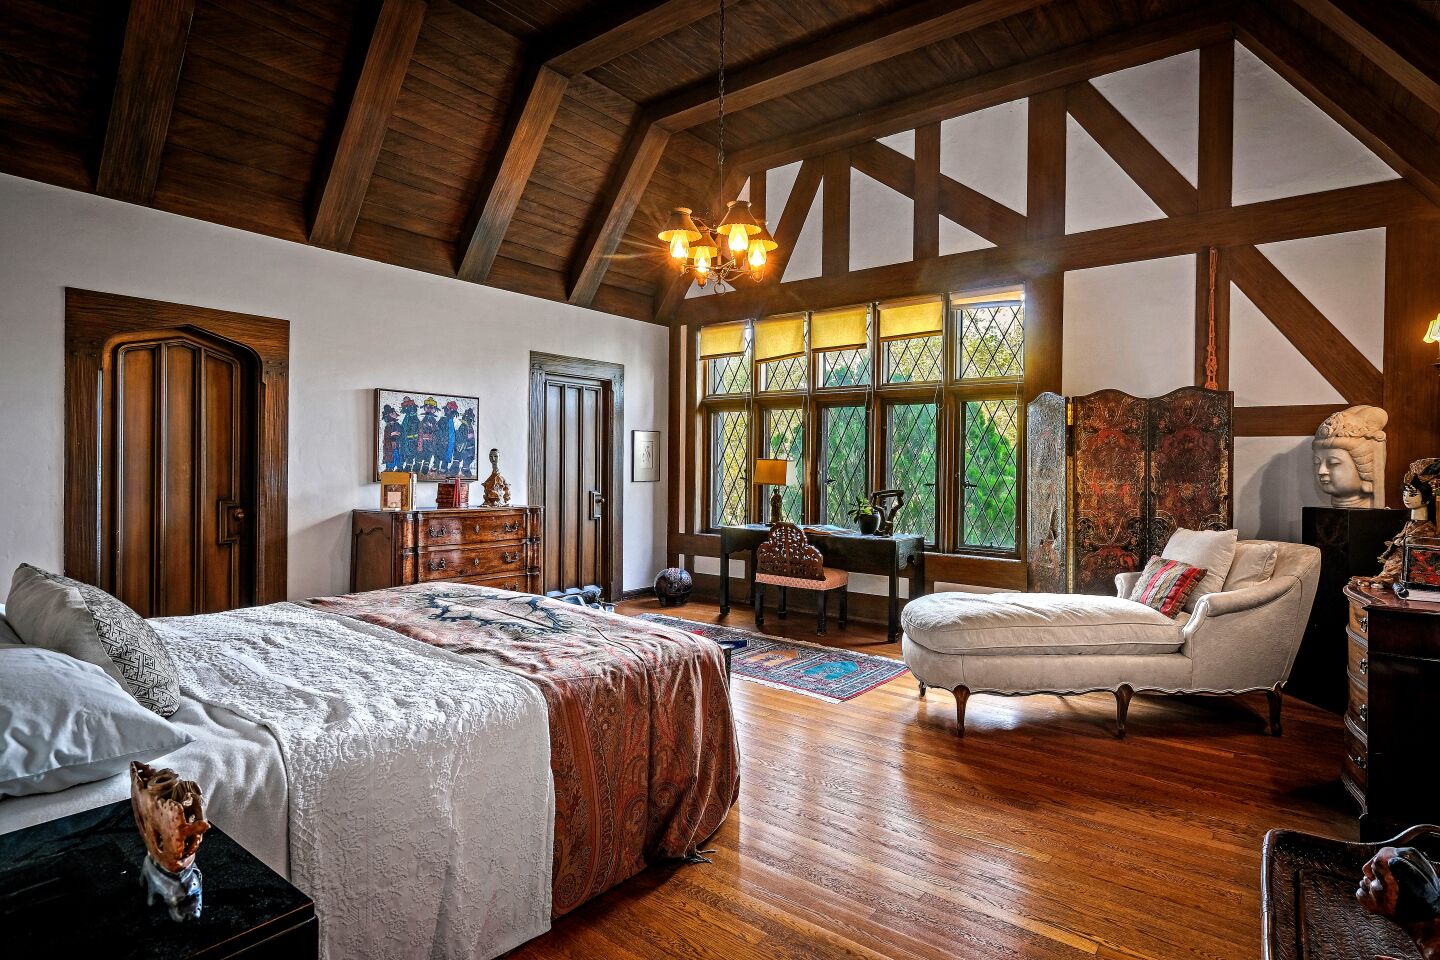 An upper-level bedroom with high wood-beamed ceilings and mullioned windows